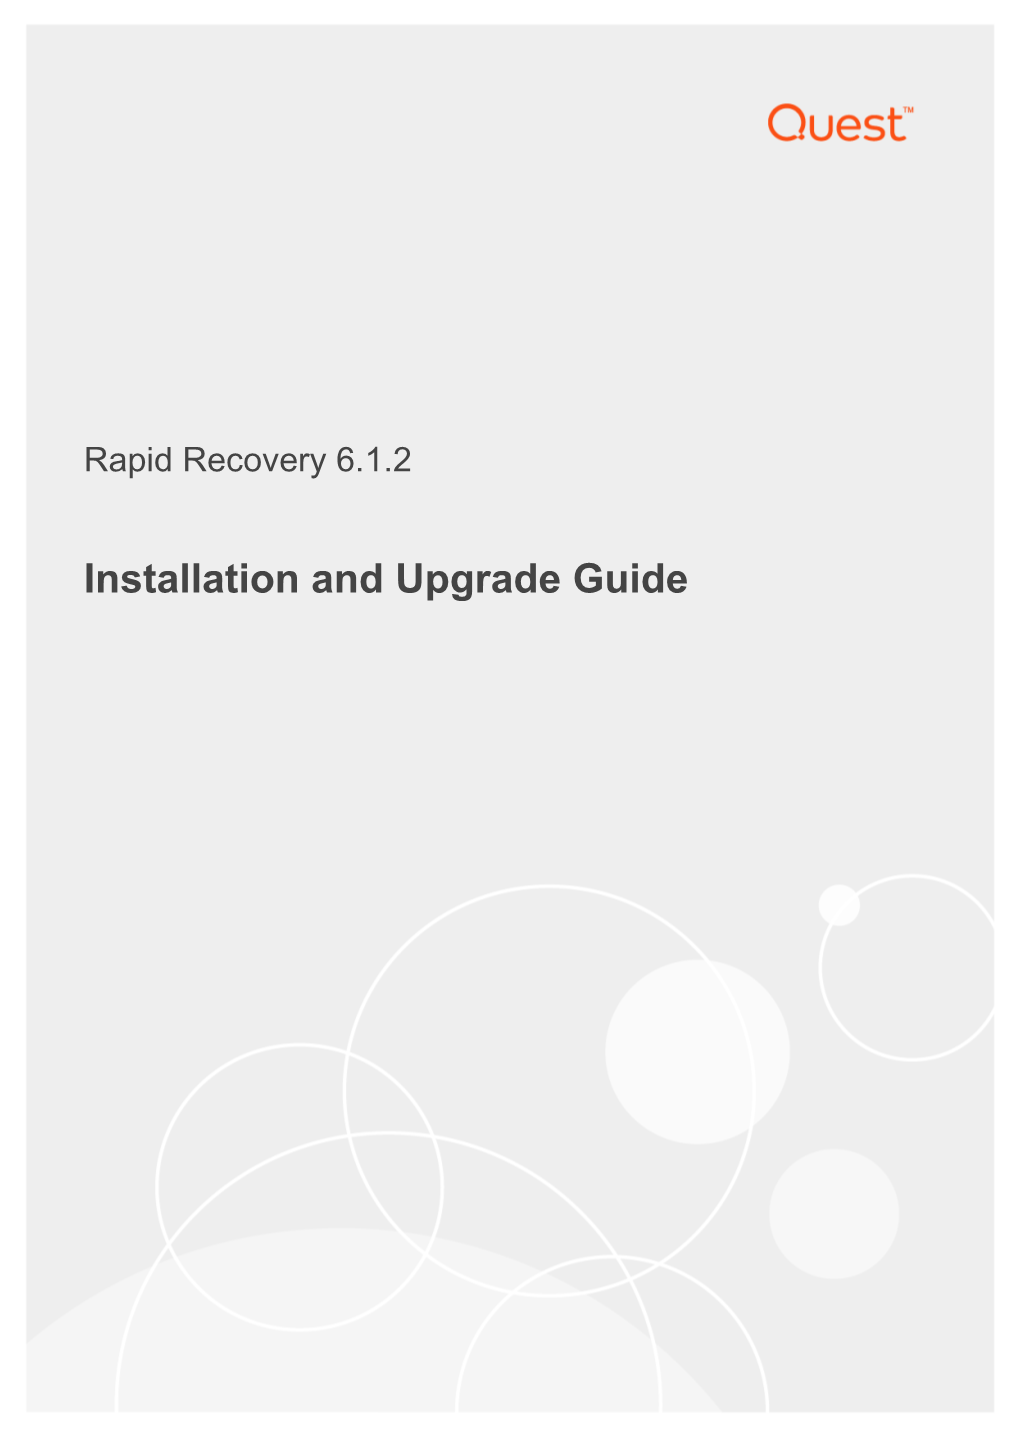 Rapid Recovery 6.1.2